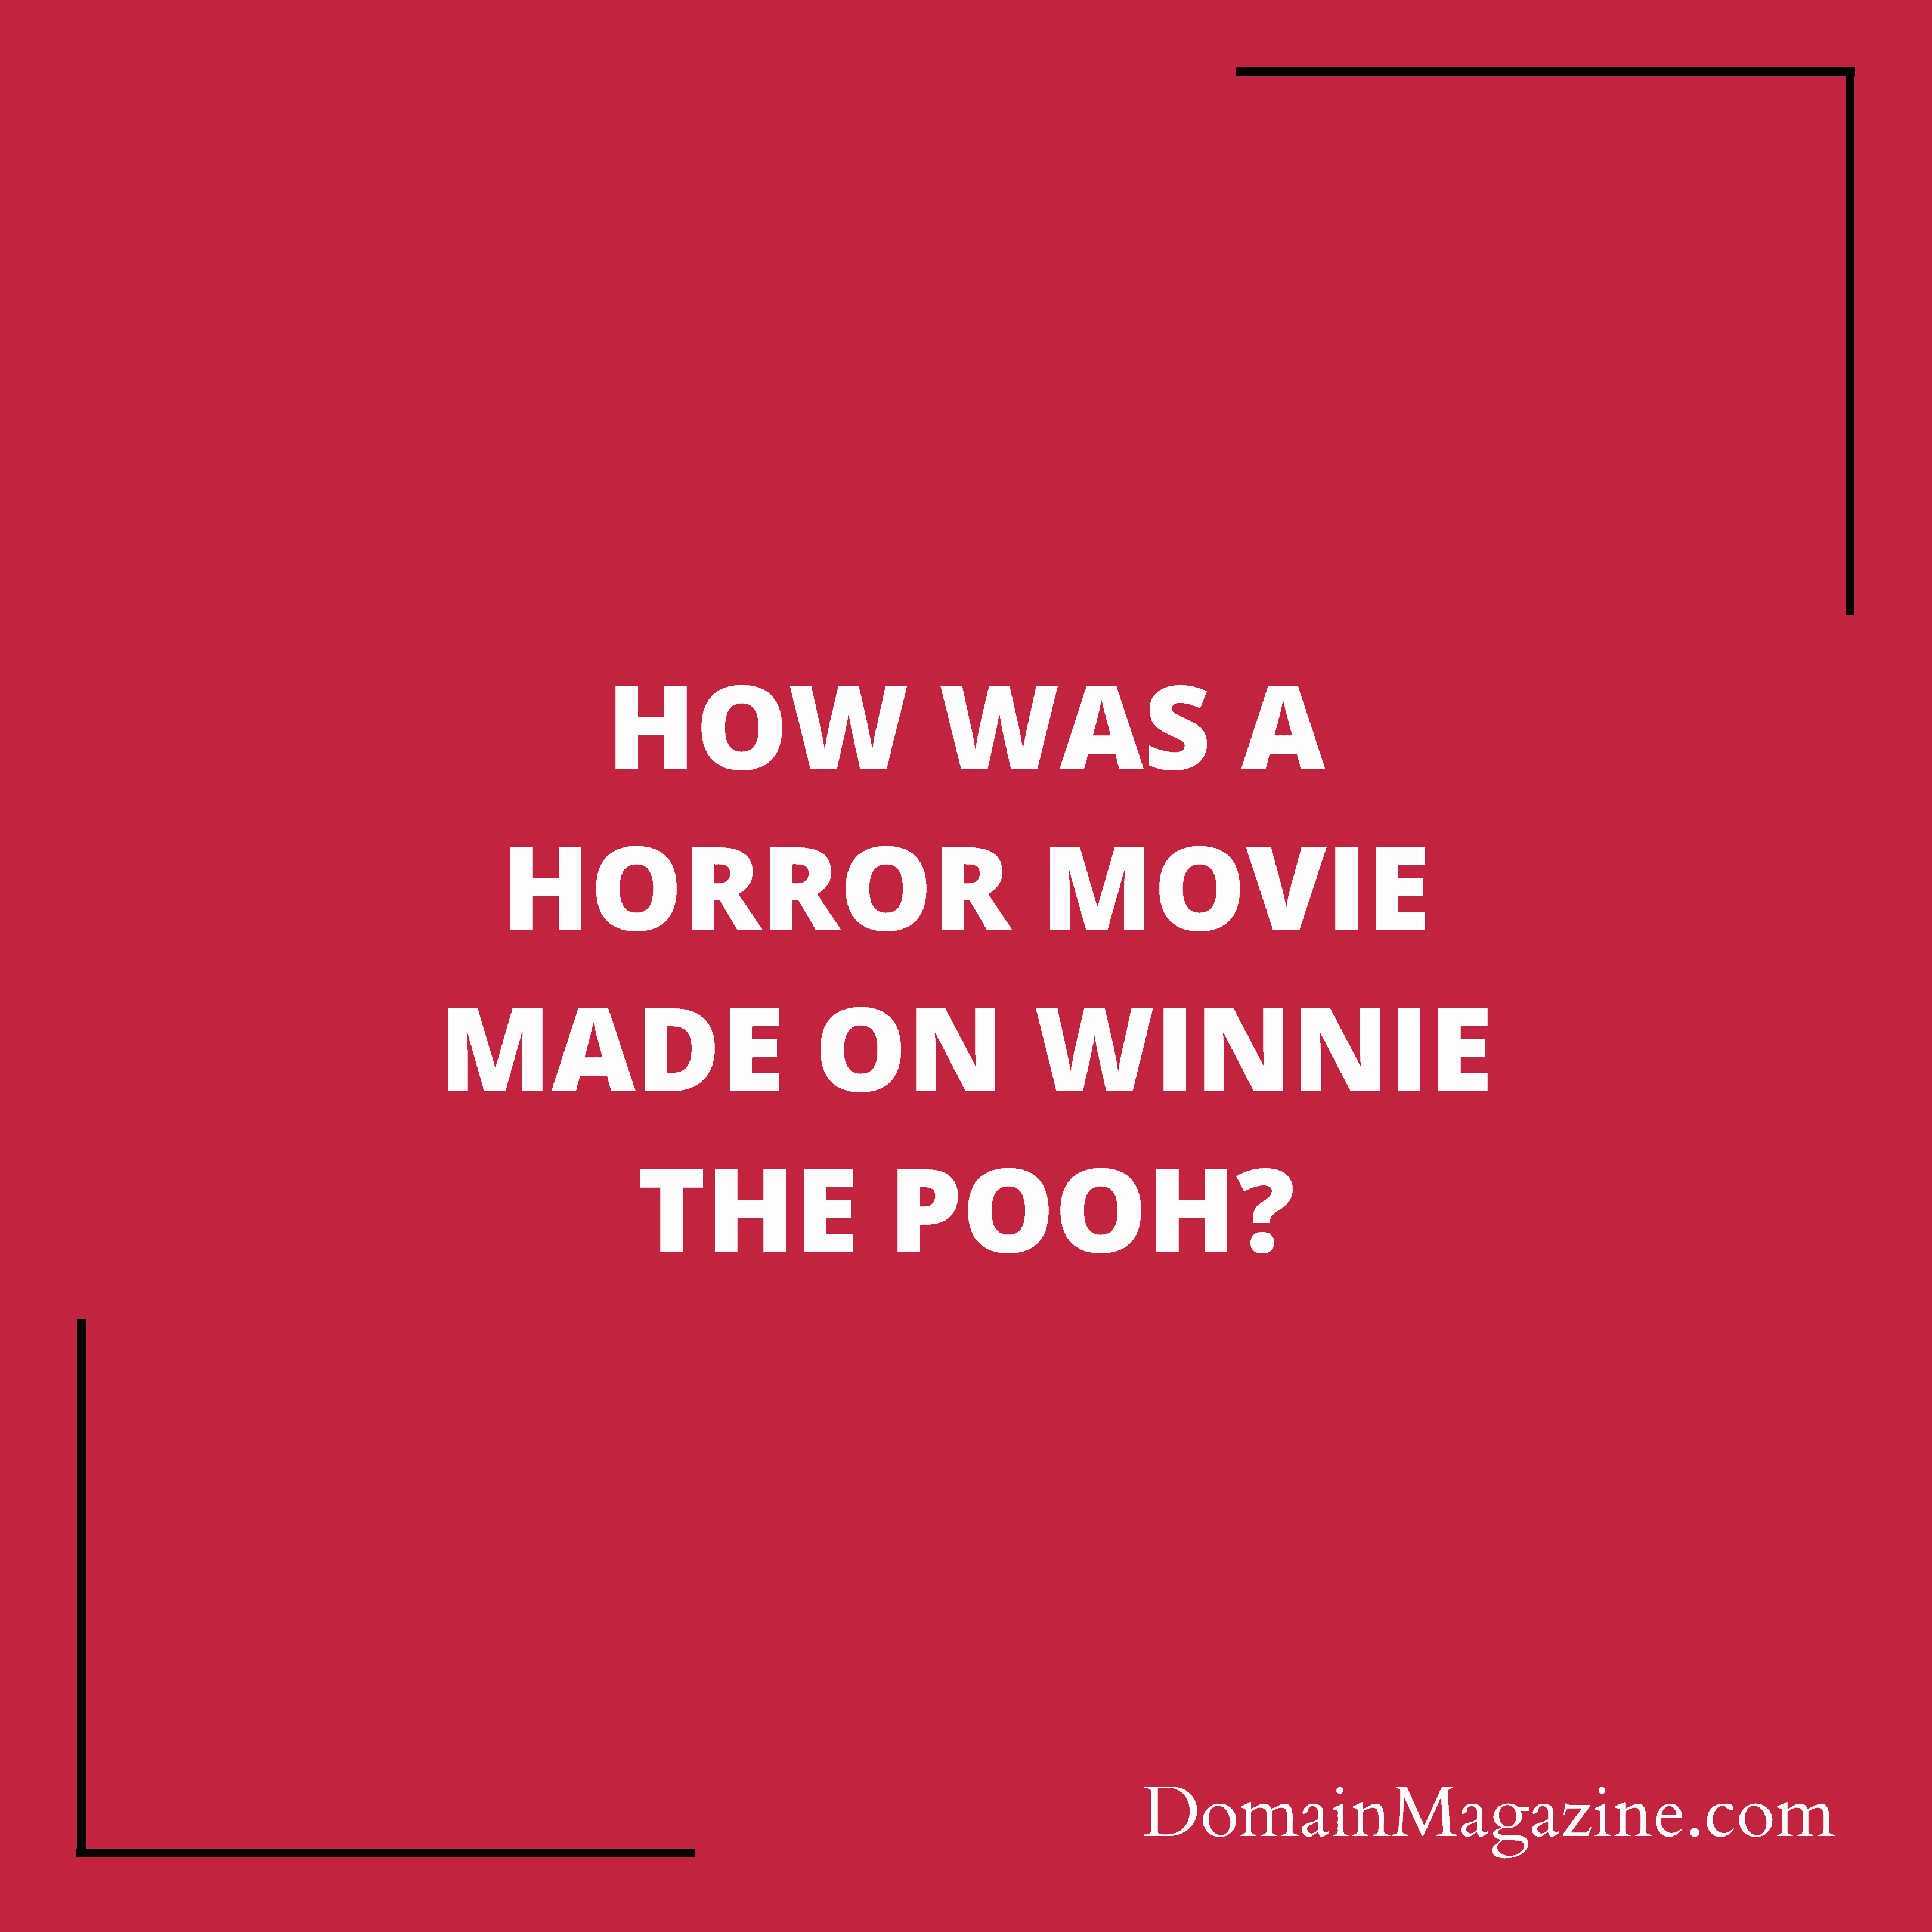 How was a horror movie made on Winnie the Pooh?